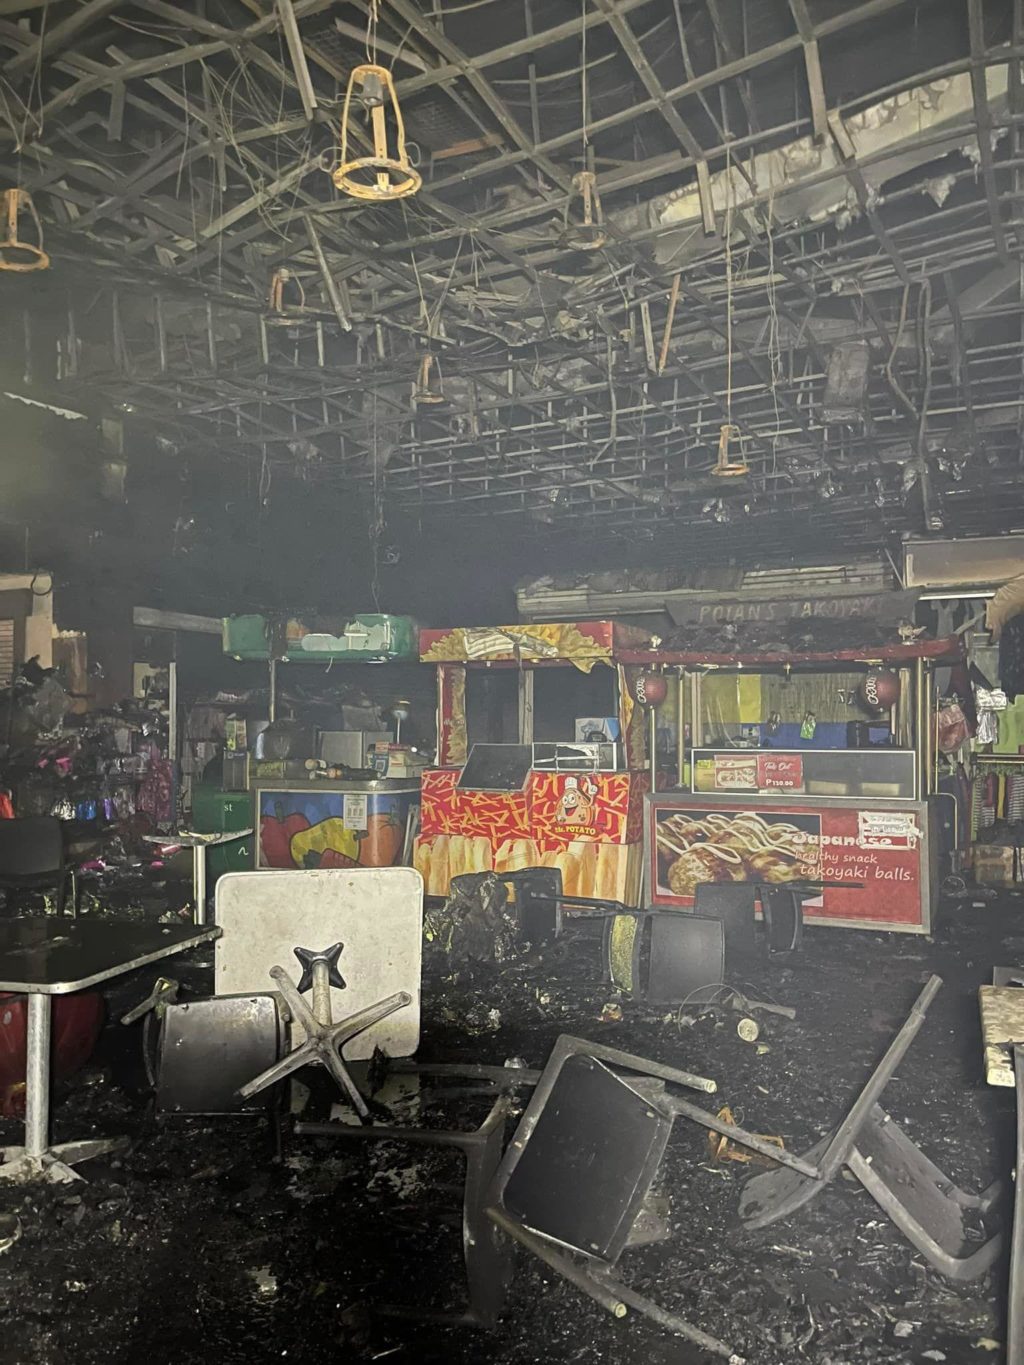 Rama has ordered law enforcers to secure the fire-damaged APM Mall to prevent looting. In photo is the inside of the APM Mall after it was hit by a fire last Friday, January 28. | Photo courtesy of the Cebu City Fire Office